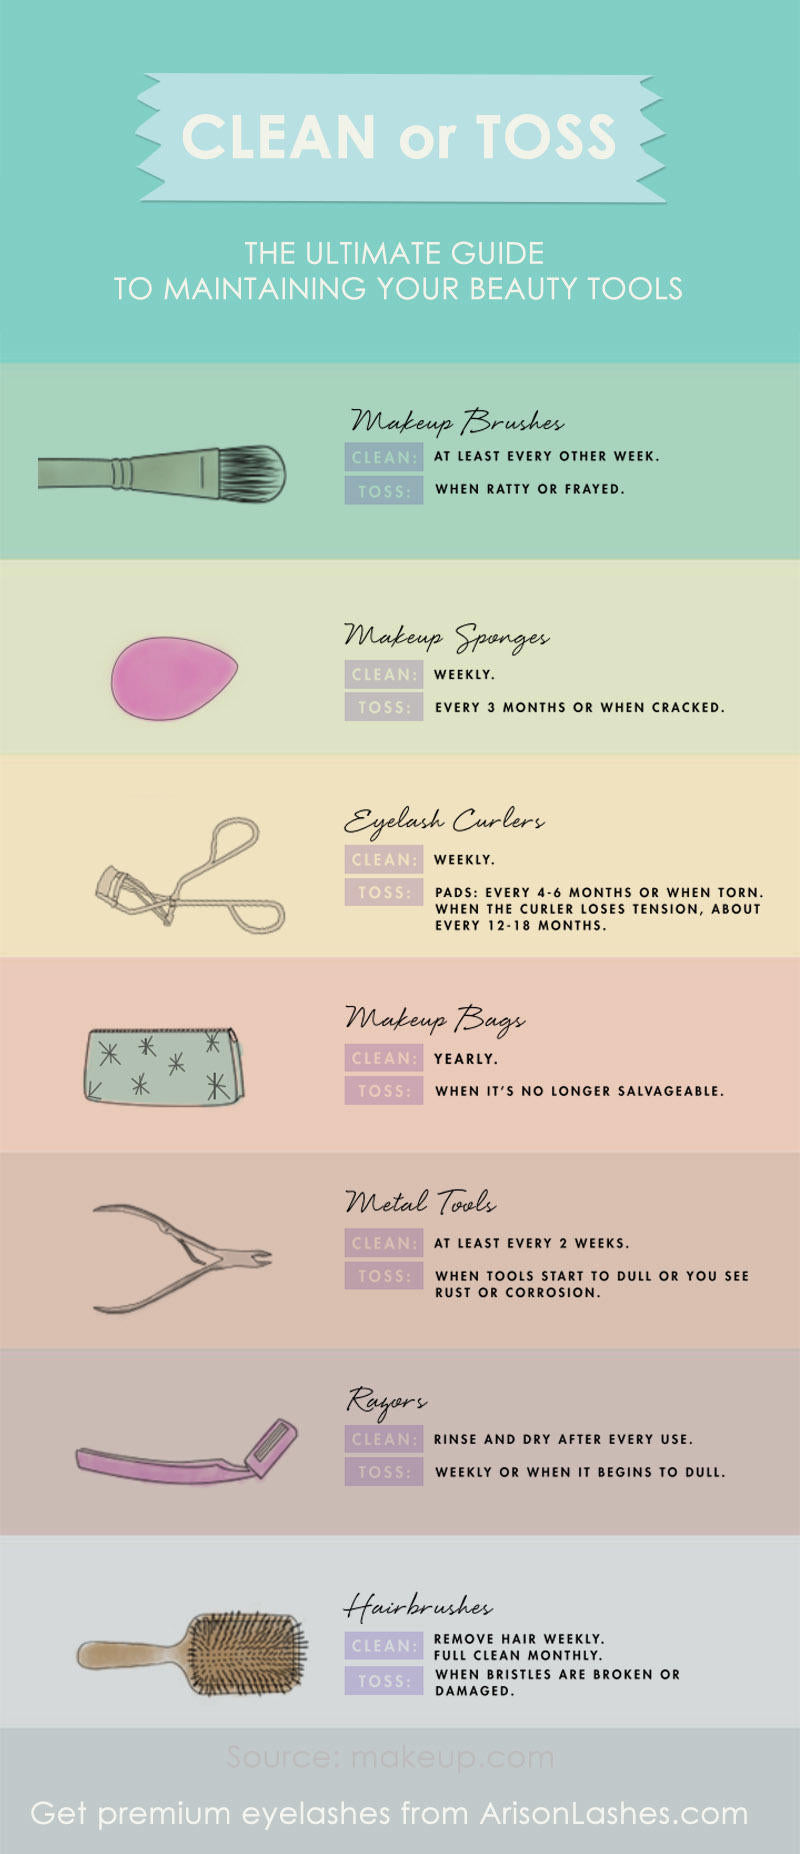 Not sure to clean or throw away your beauty tools? Check this guide!